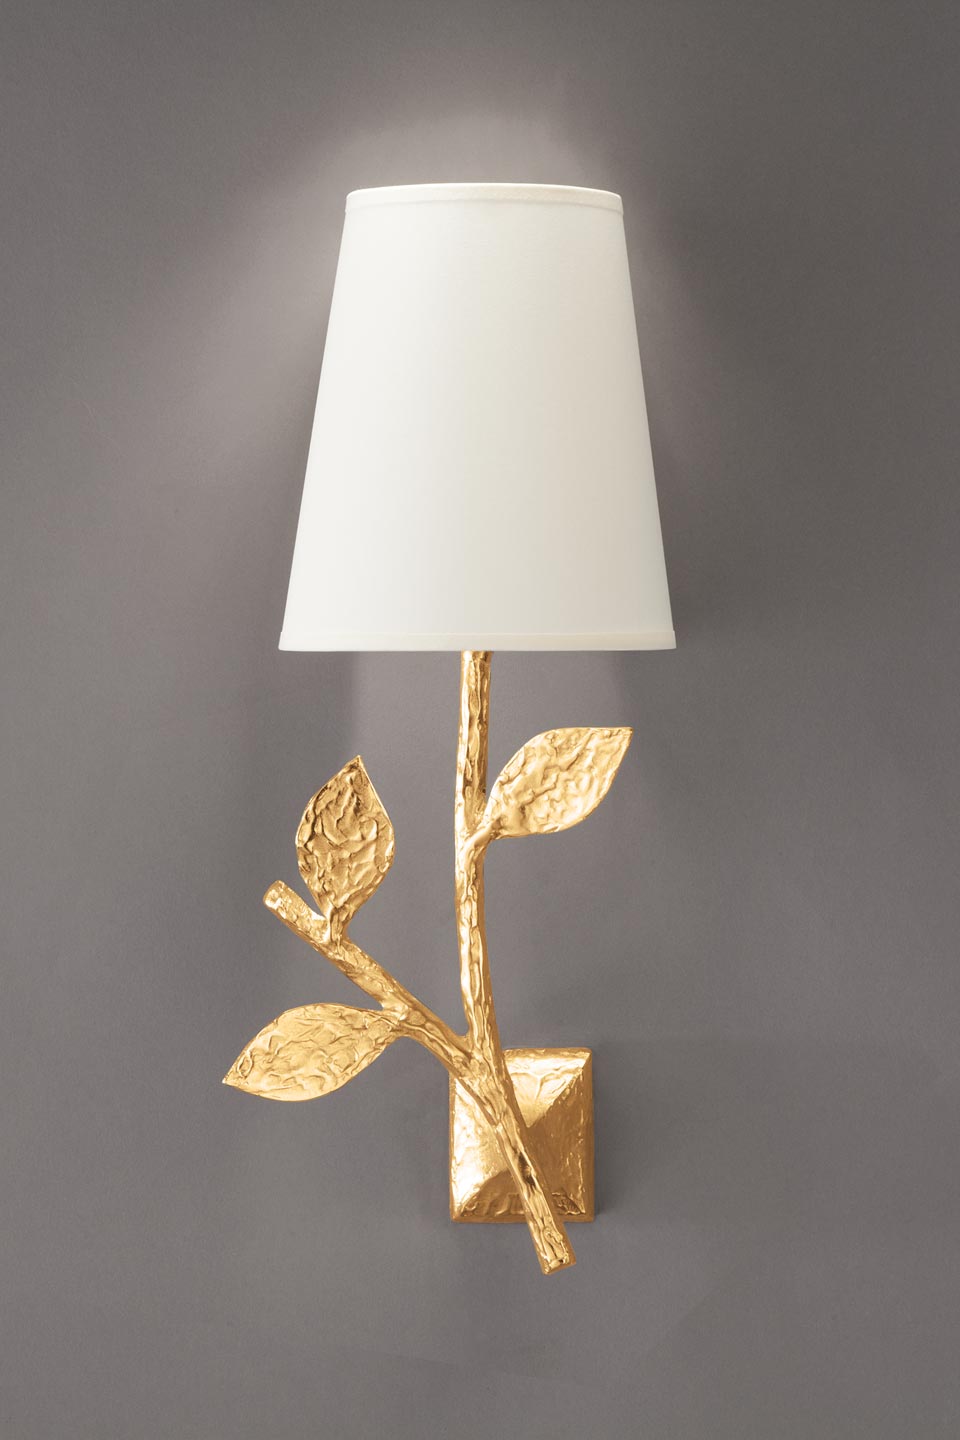 Flora plant wall light in gilded bronze. Objet insolite. 